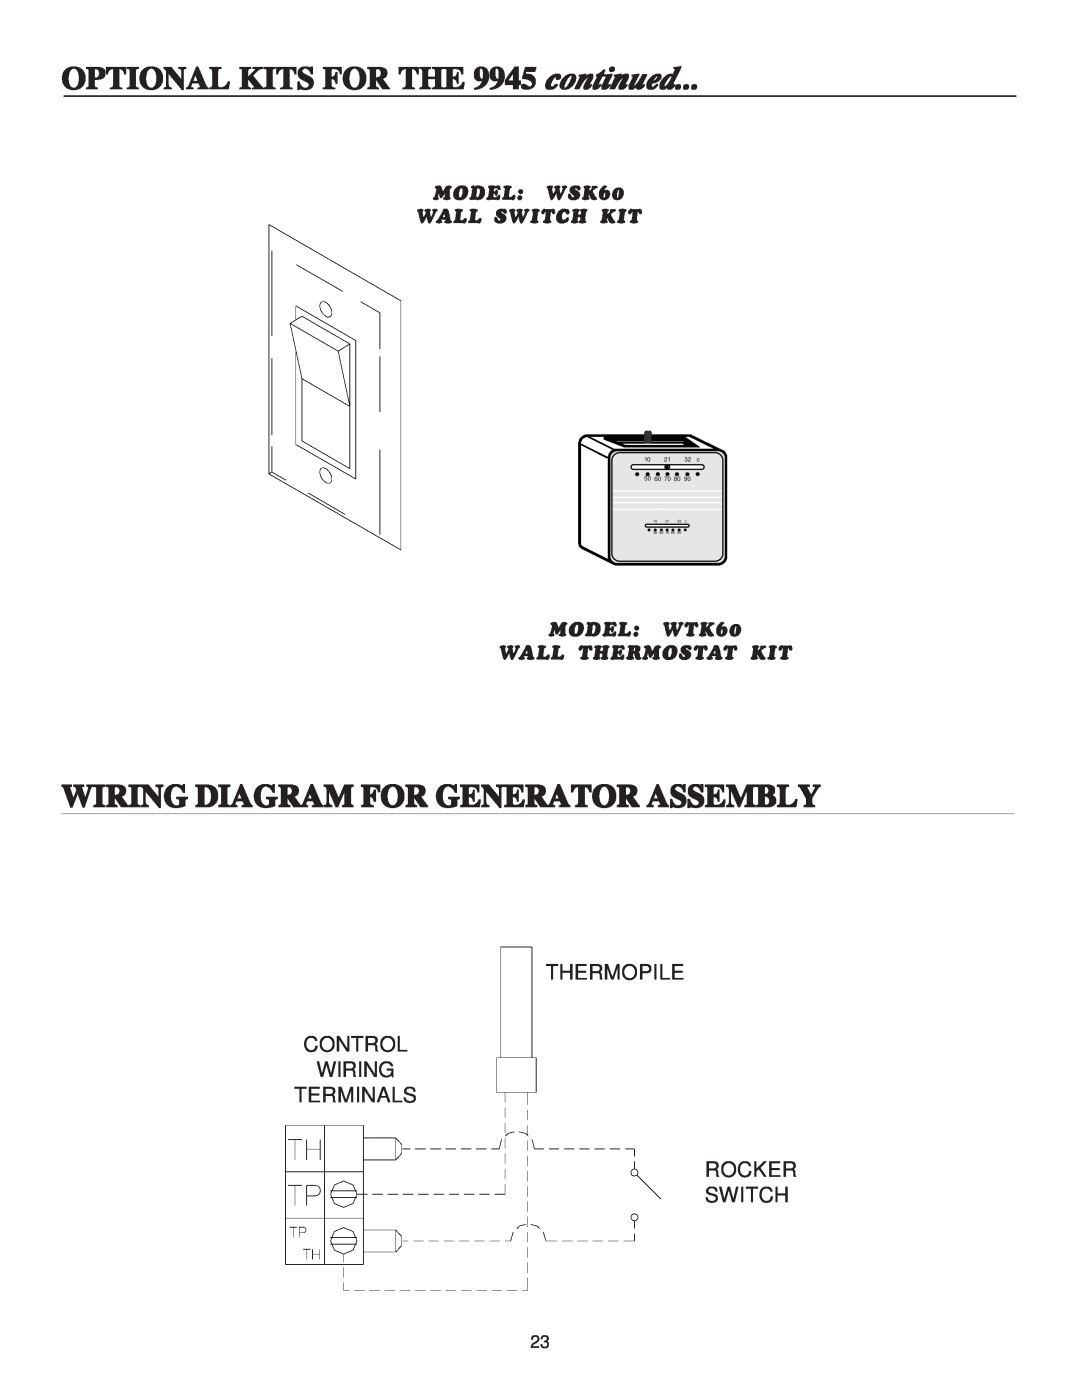 United States Stove B9945N manual OPTIONAL KITS FOR THE 9945 continued, Wiring Diagram For Generator Assembly, 10 21 32 c 